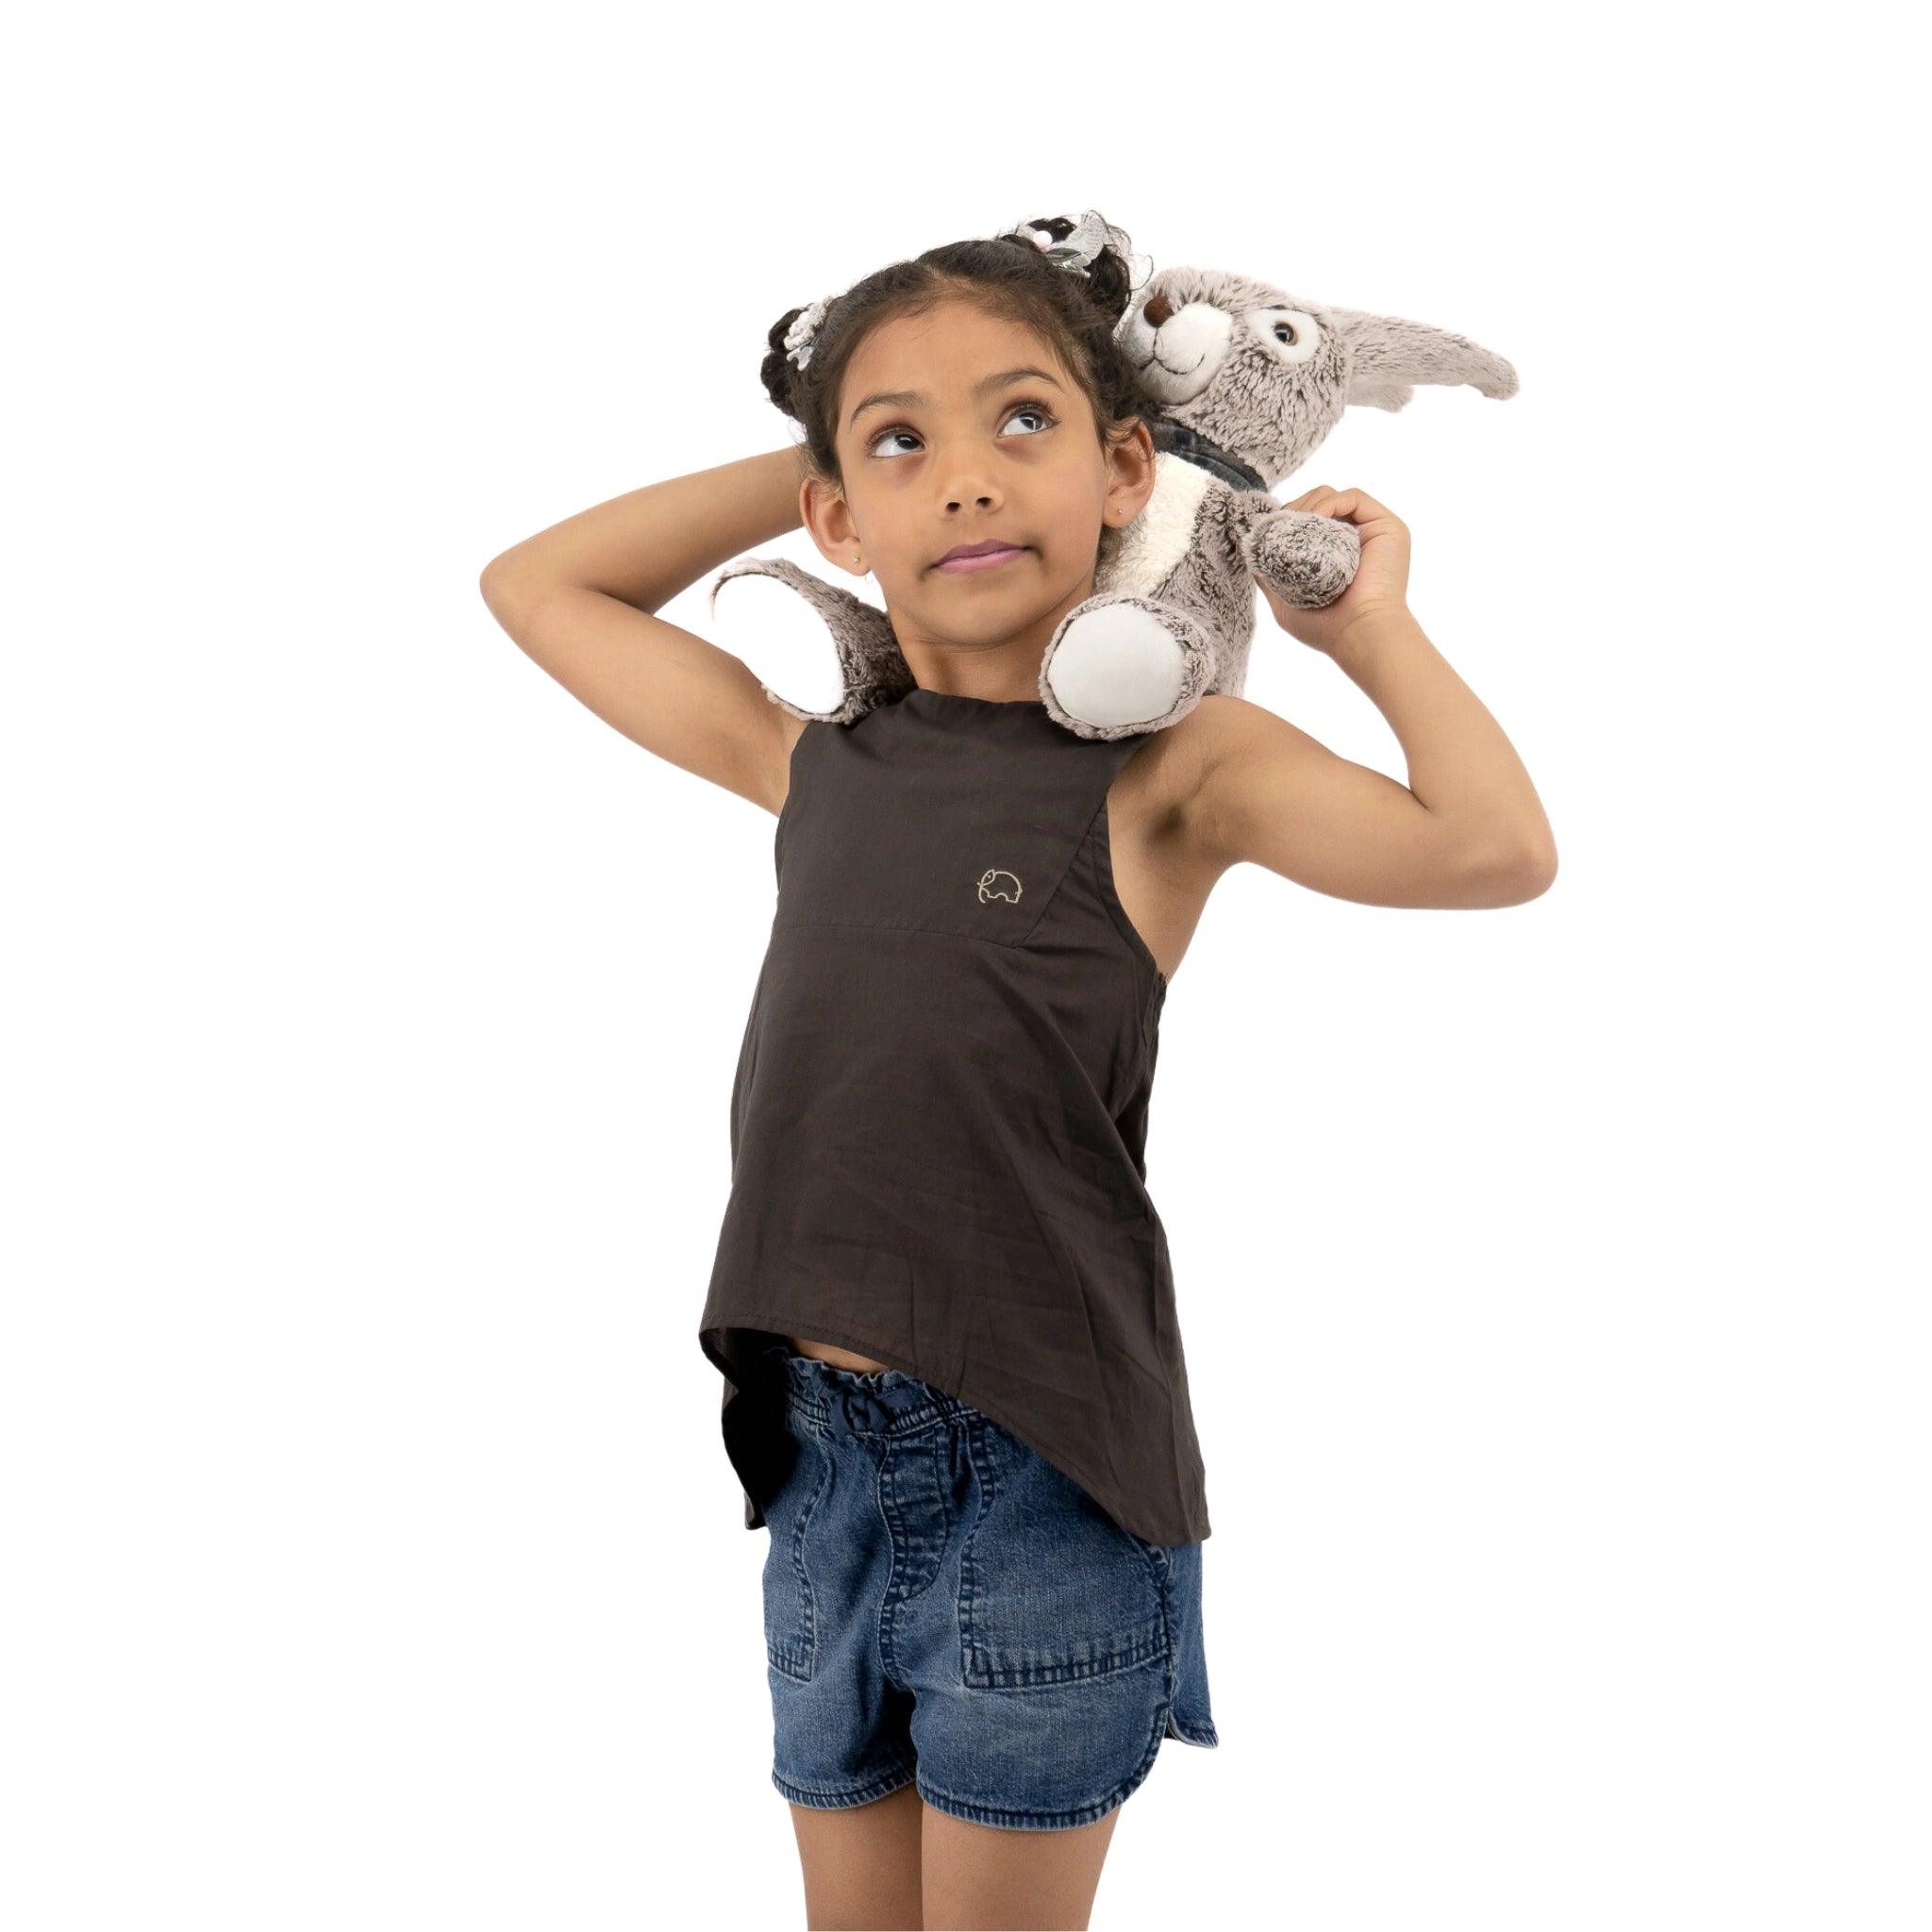 A young girl with a thoughtful expression, her hands on her head, wears a Karee Plum Kitten Cotton Bib Neck Top for Kids and holds a plush grey koala toy on her shoulder, against a white background.